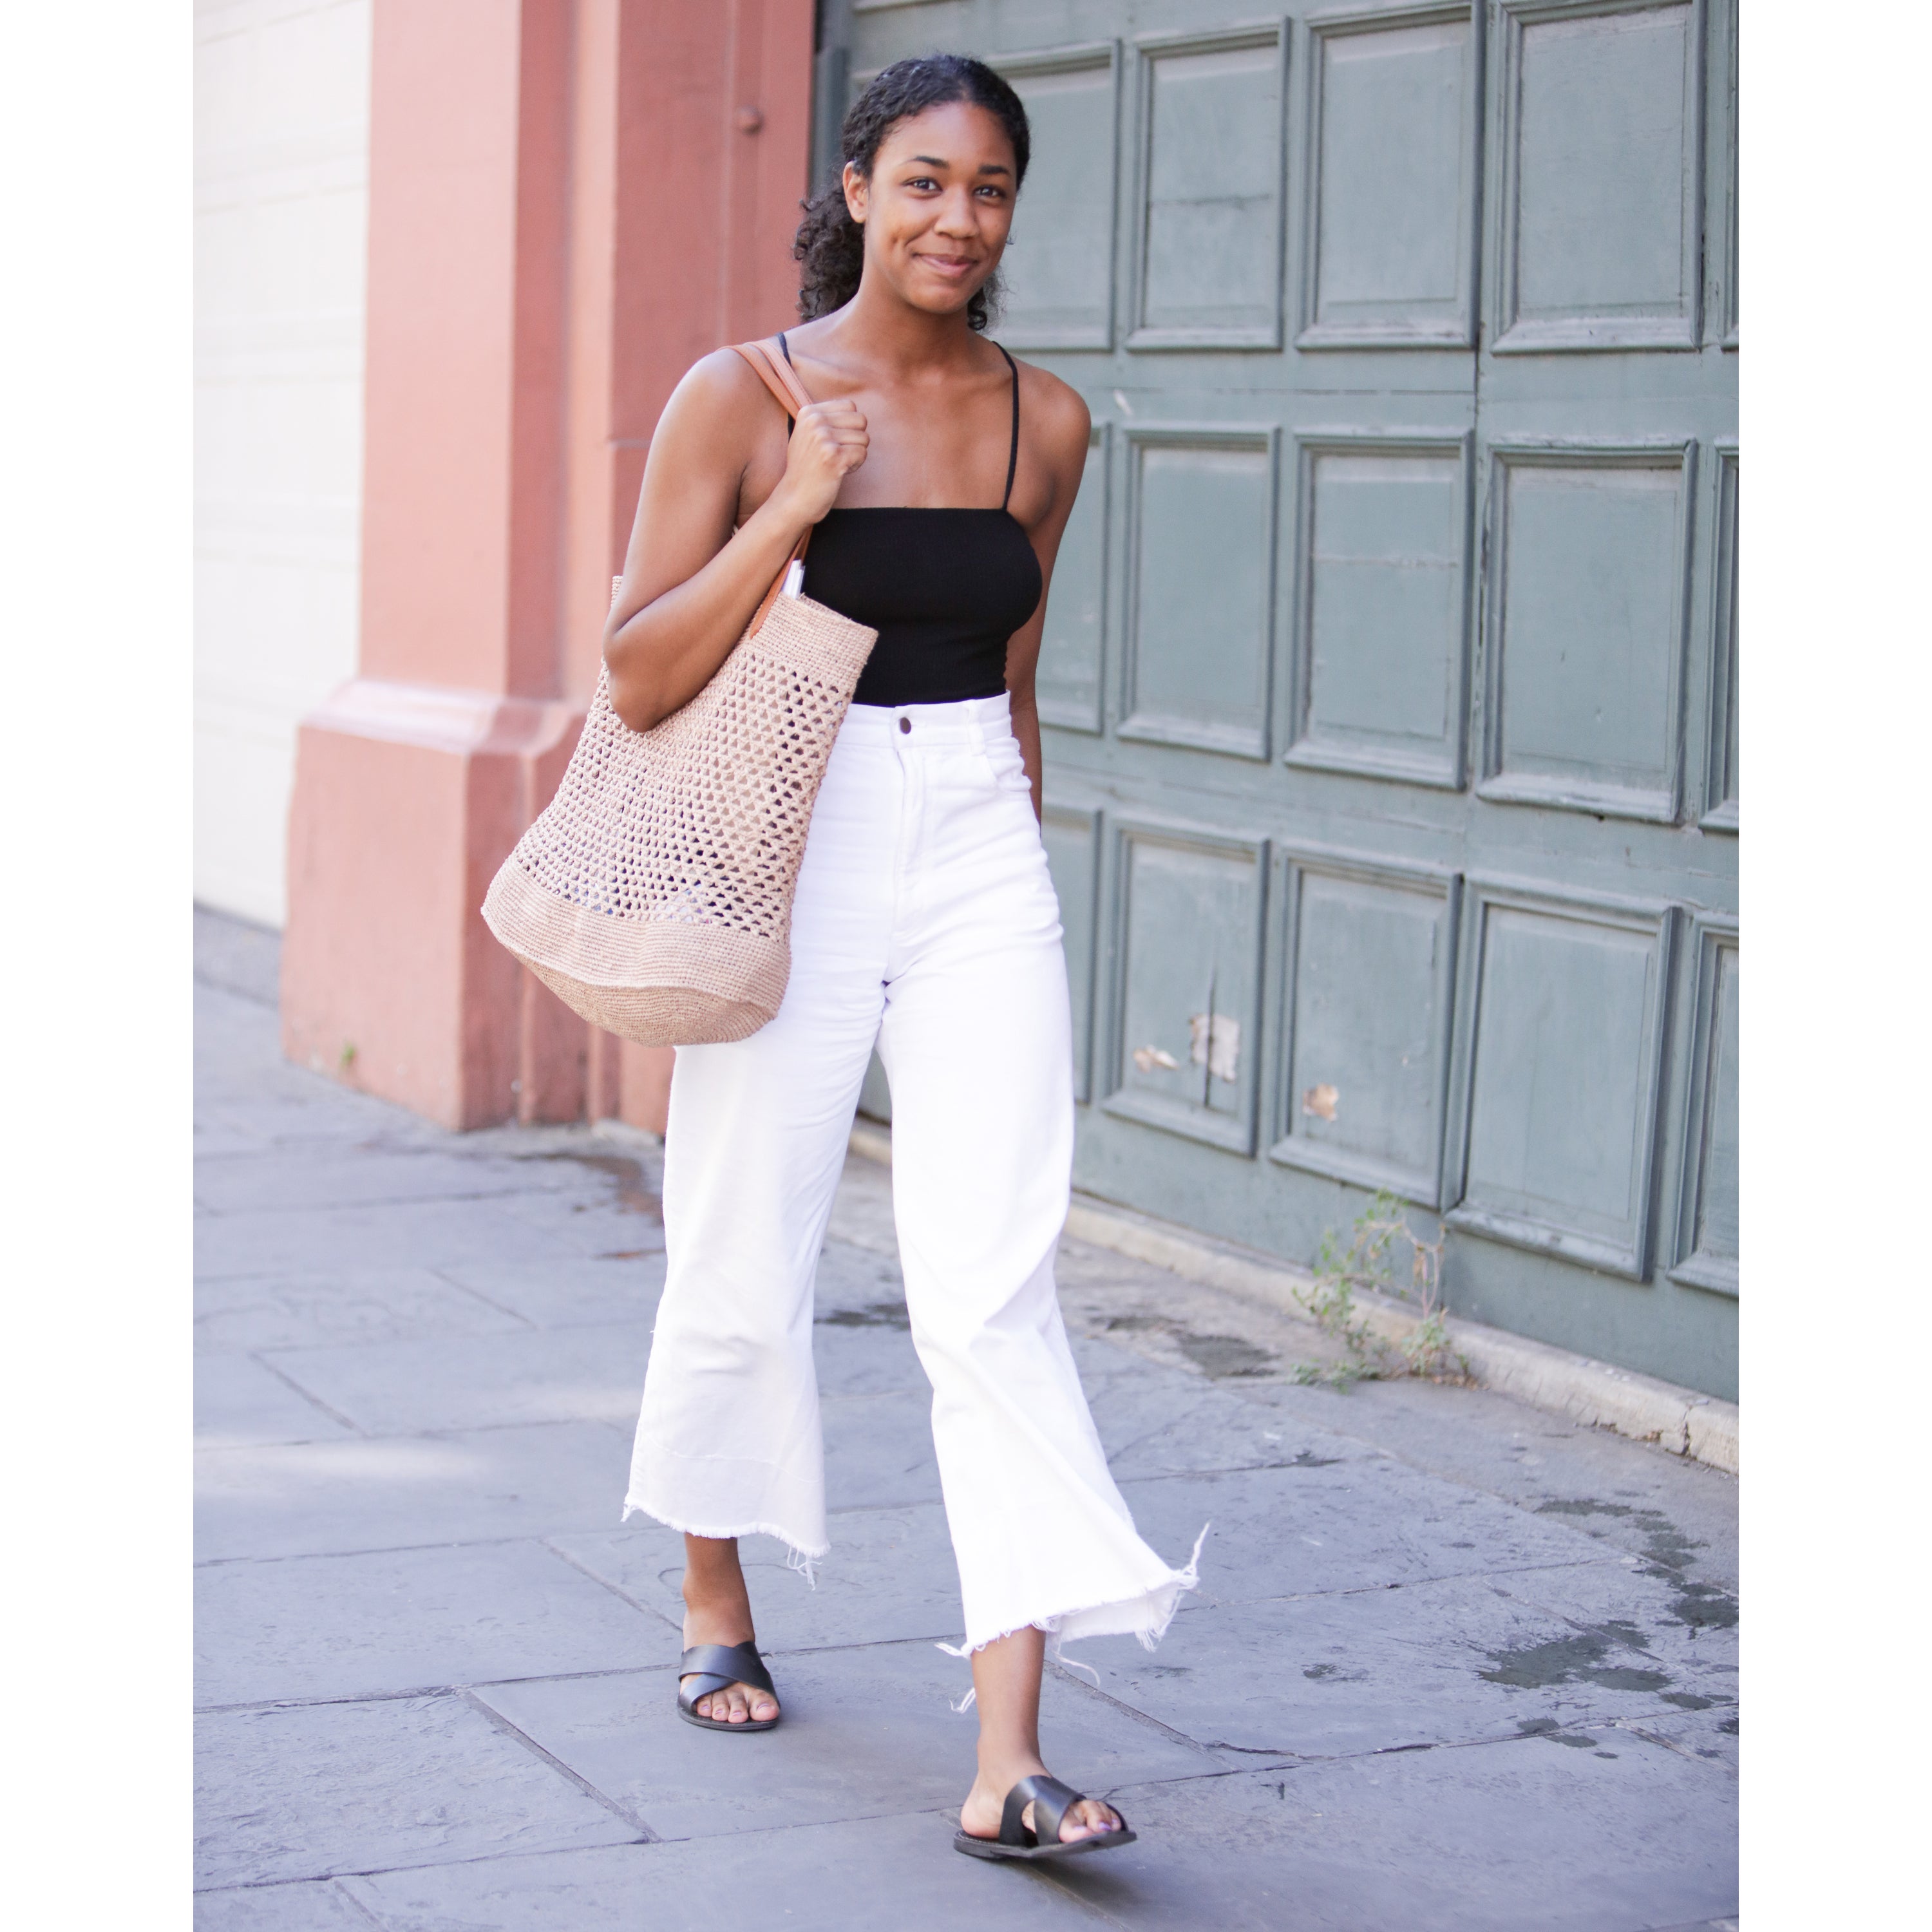 All The Best Street Style From ESSENCE Festival 2016 | Essence